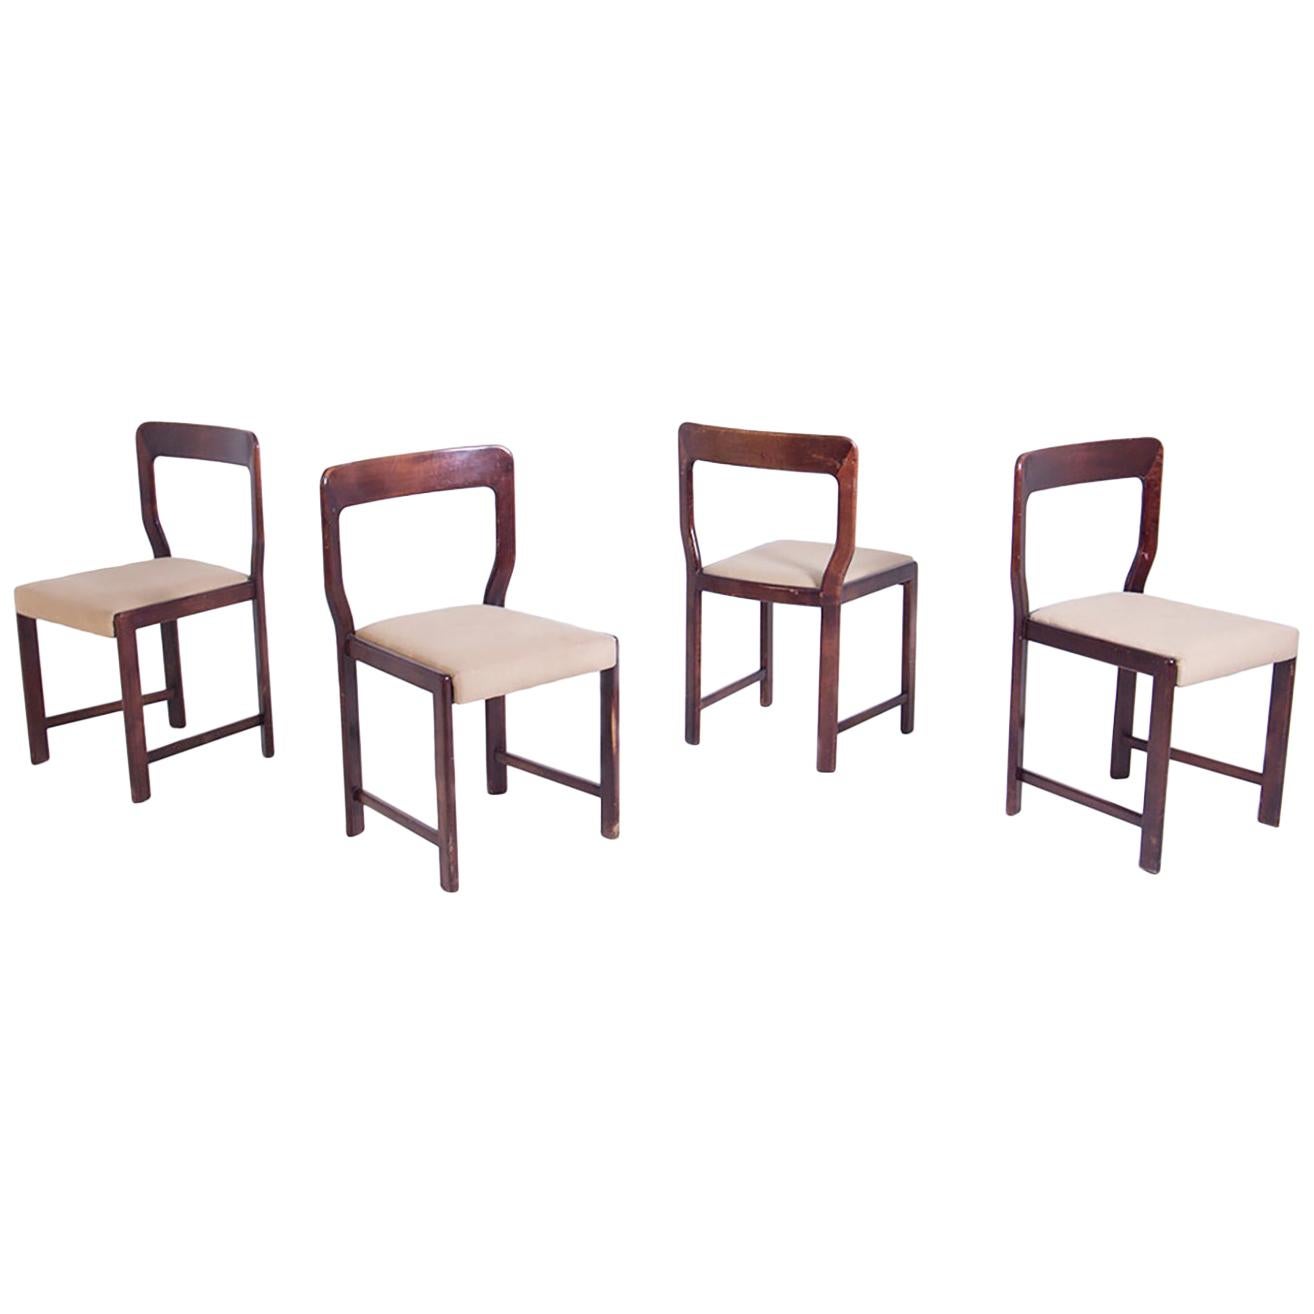 Set of Four Chairs by Mario Sabot, 1960s